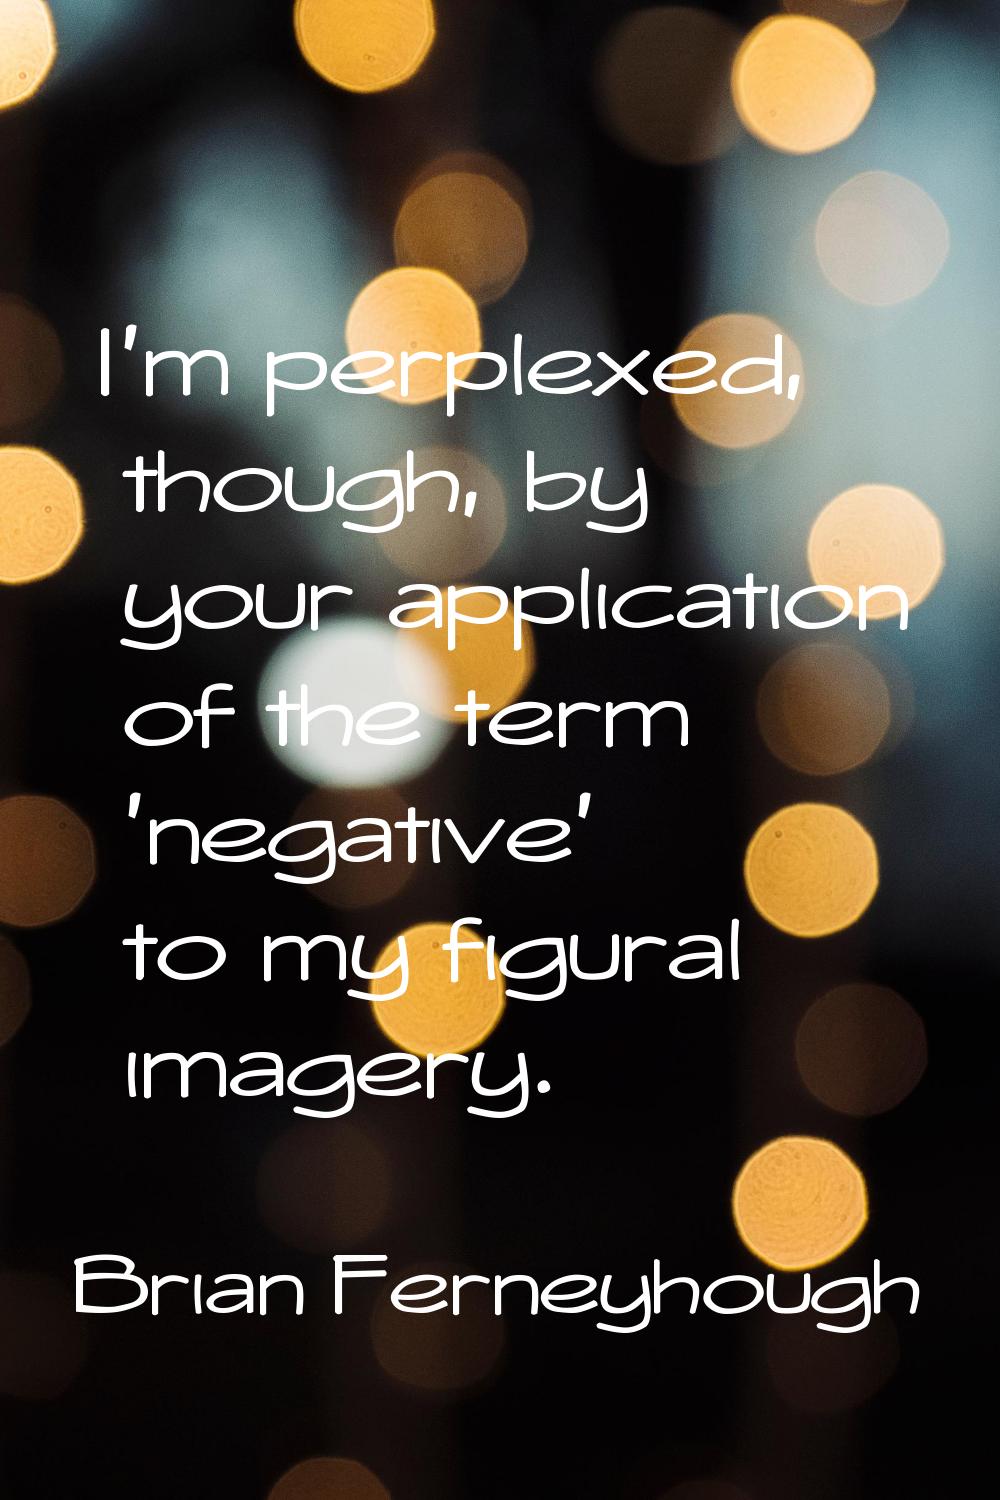 I'm perplexed, though, by your application of the term 'negative' to my figural imagery.